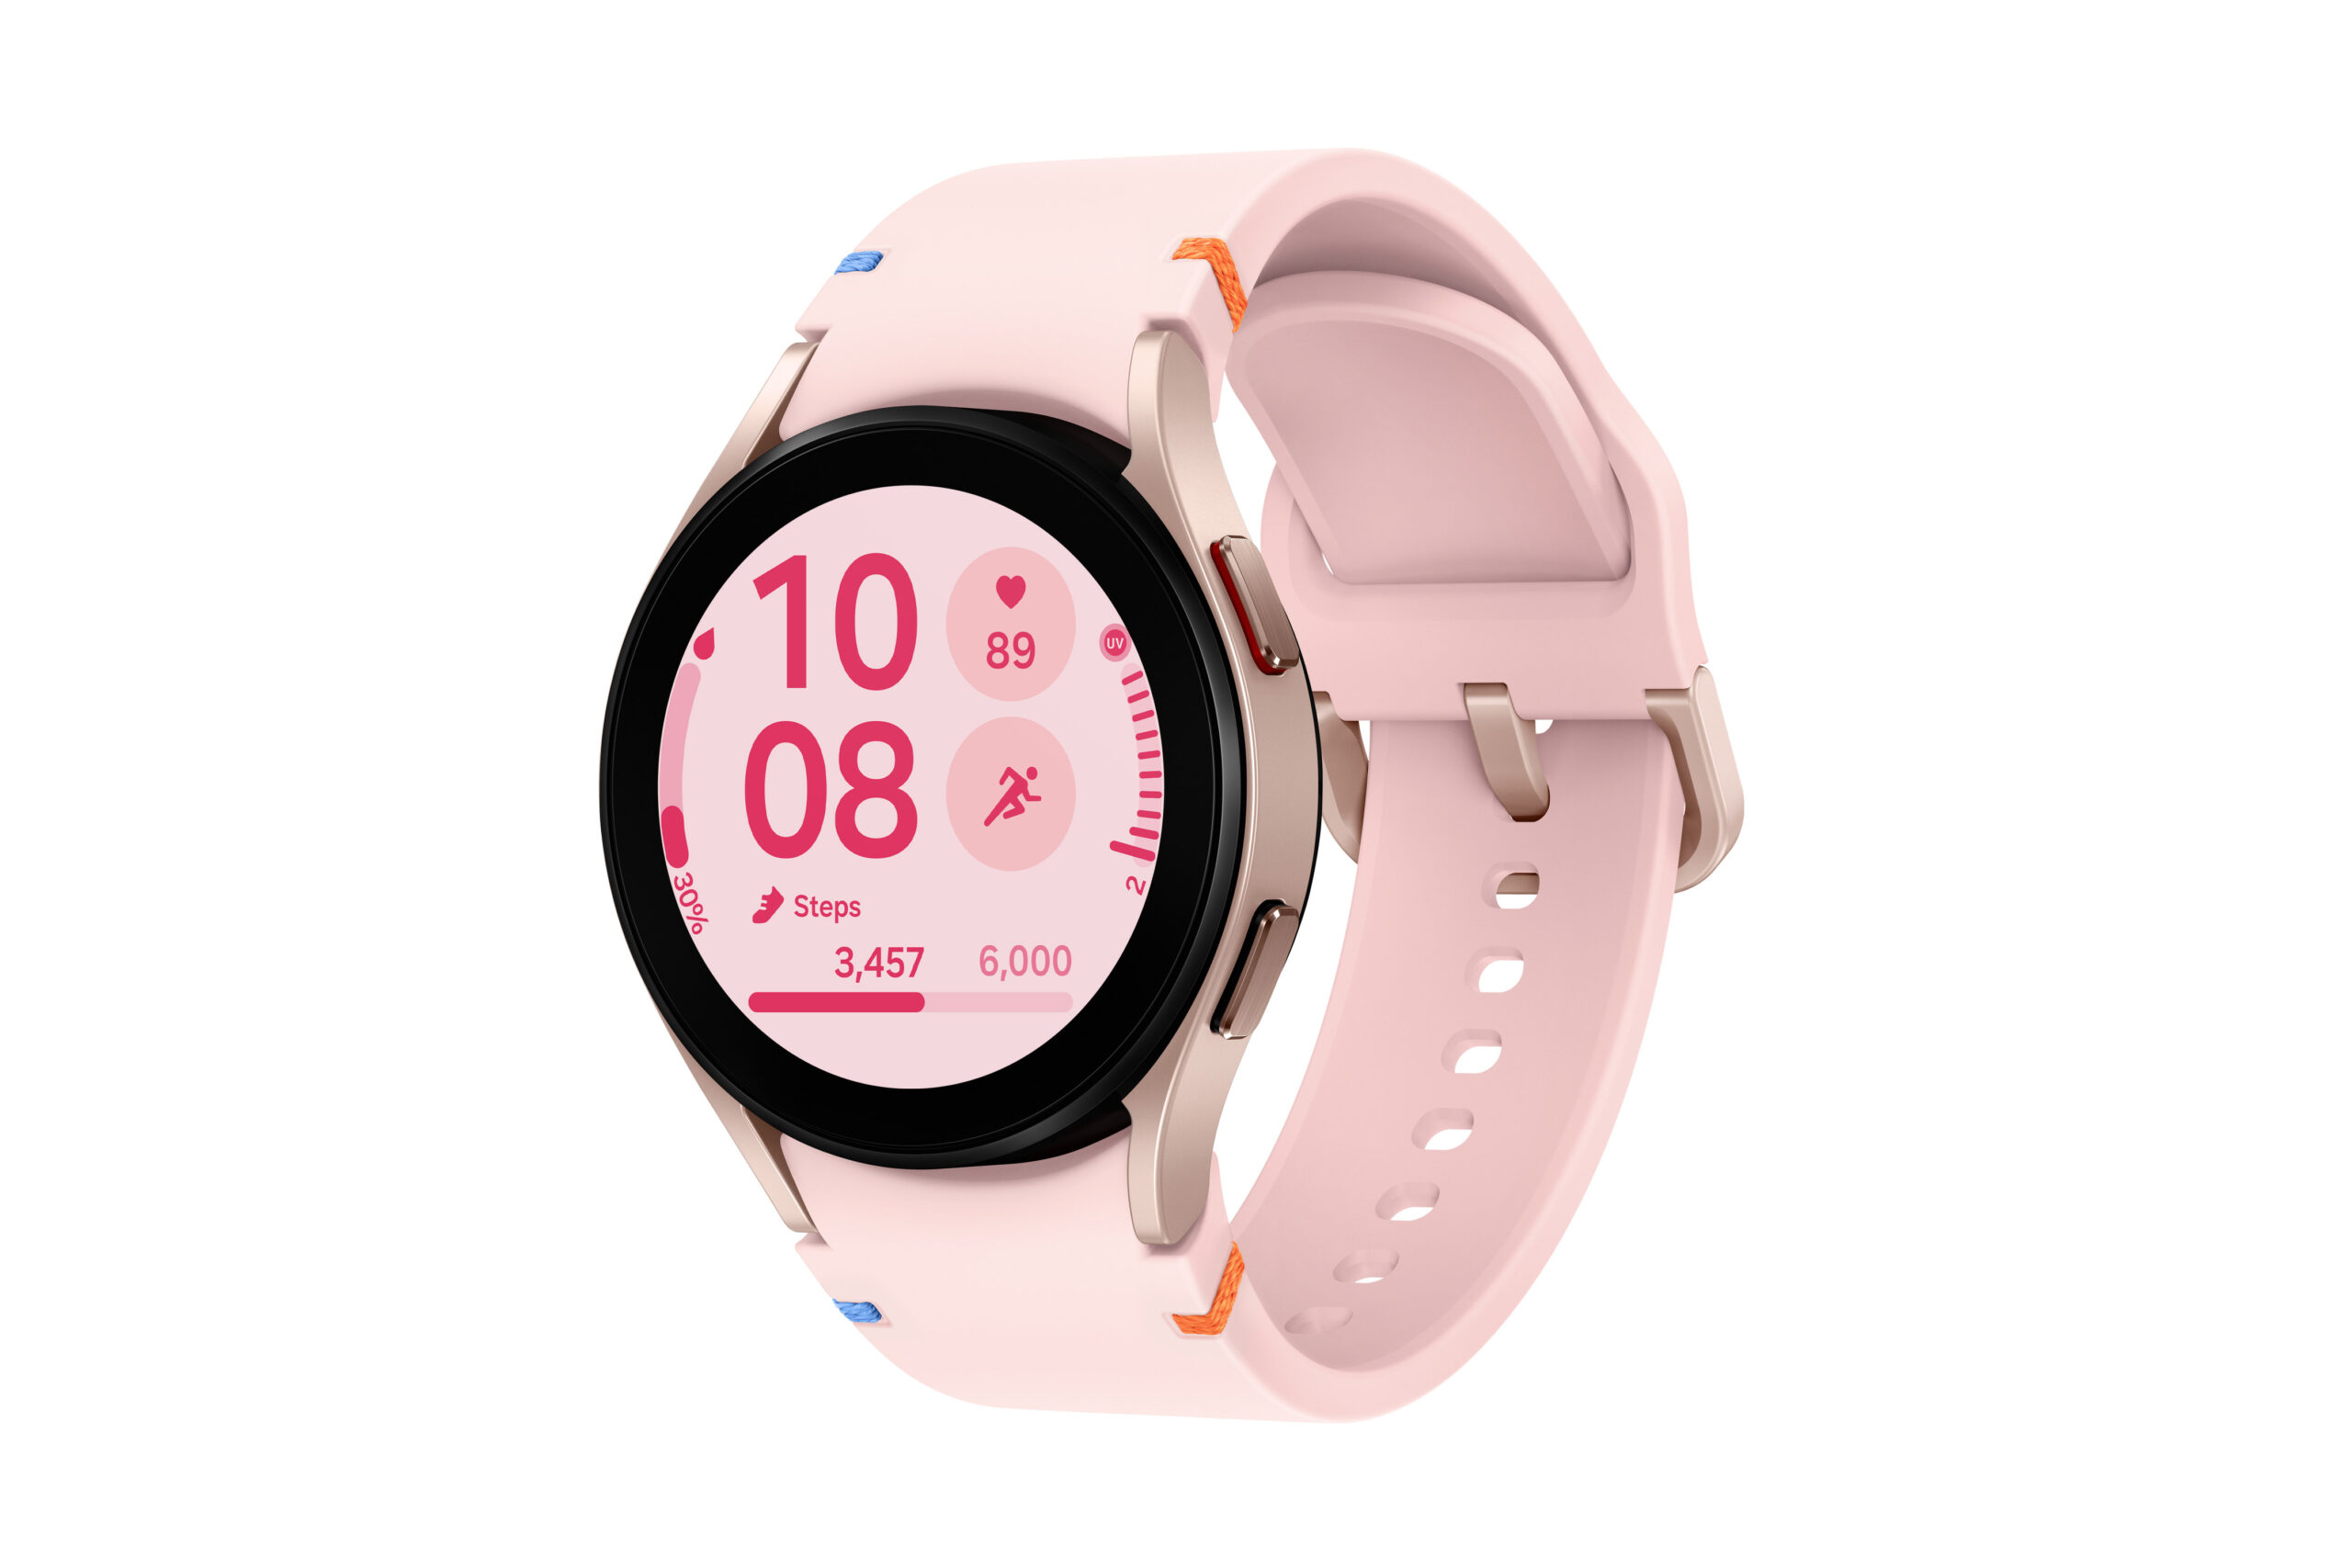 009 galaxy watch fe pinkgold r perspective scaled